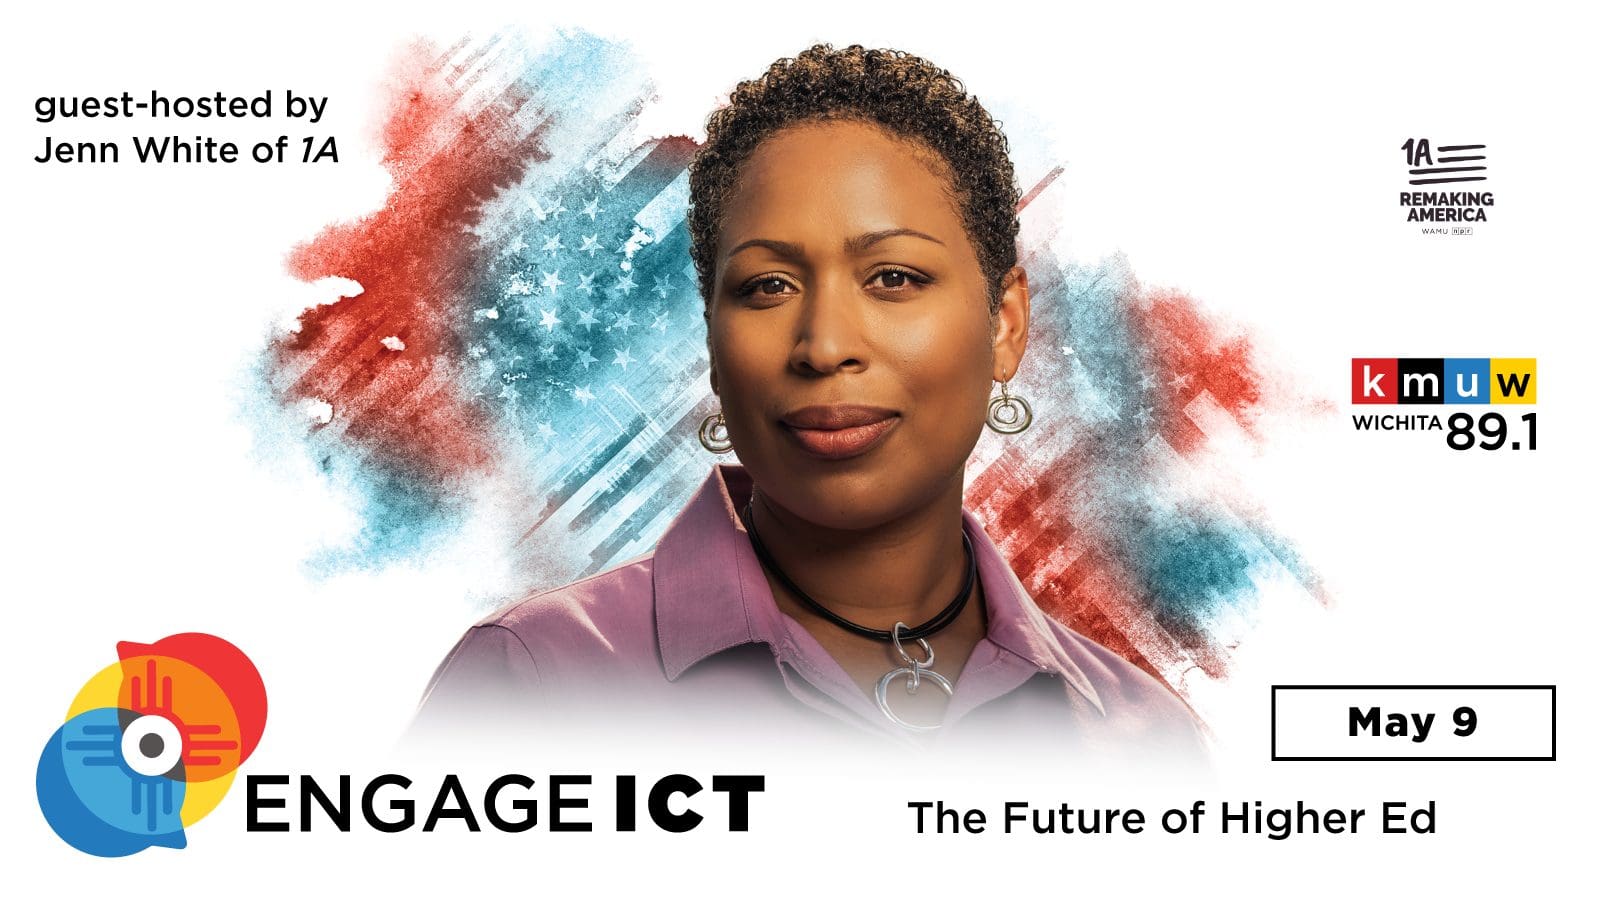 Graphic with a photo of Jenn White and the text, "Engage ICT The Future of Higher Ed guest-hosted by Jenn White of 1A May 9" and the 1A Remaking America and KMUW 89.1 logos.